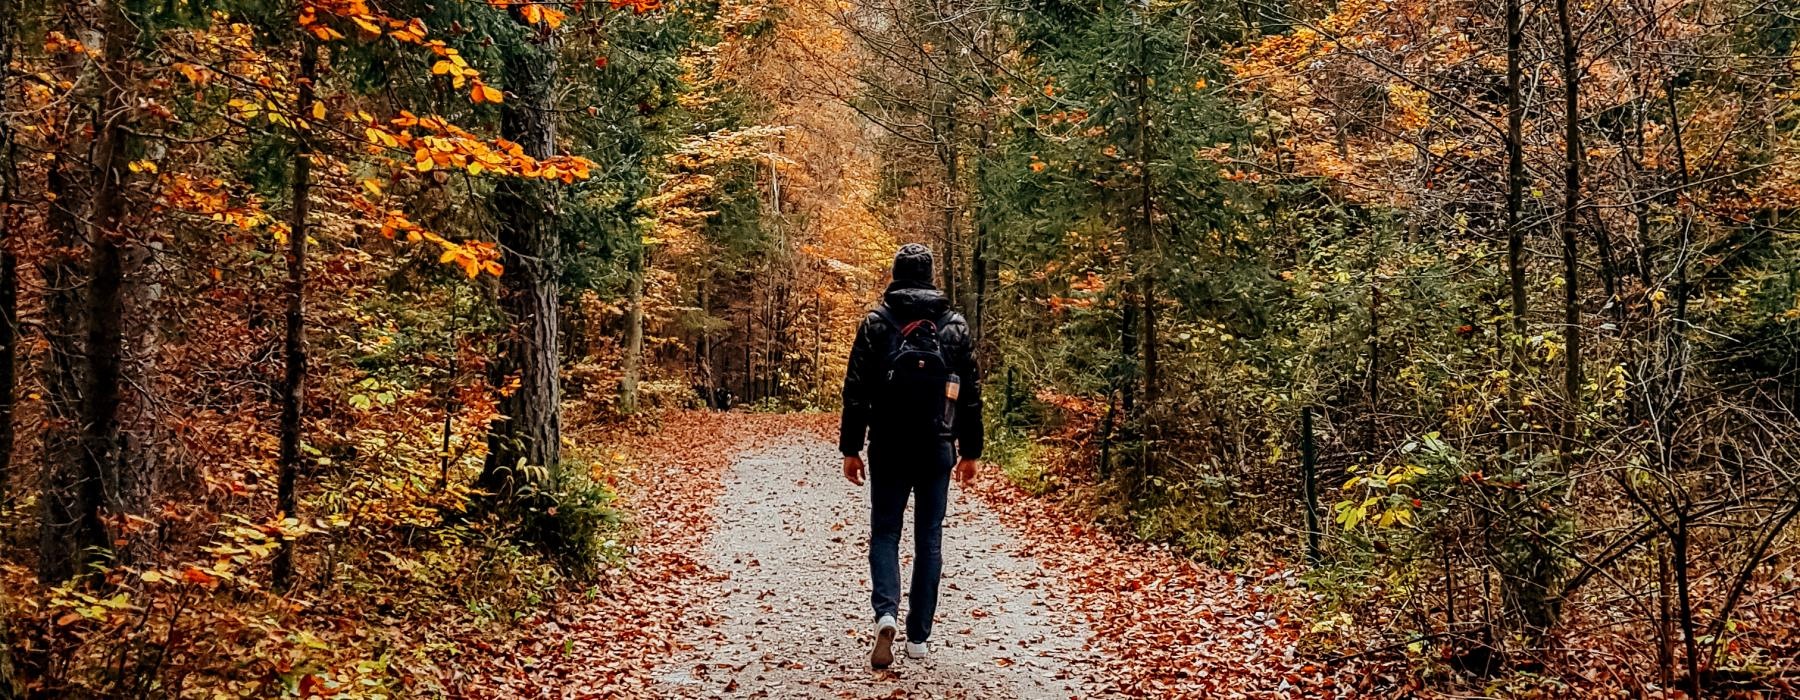 man walking on a path in a forest